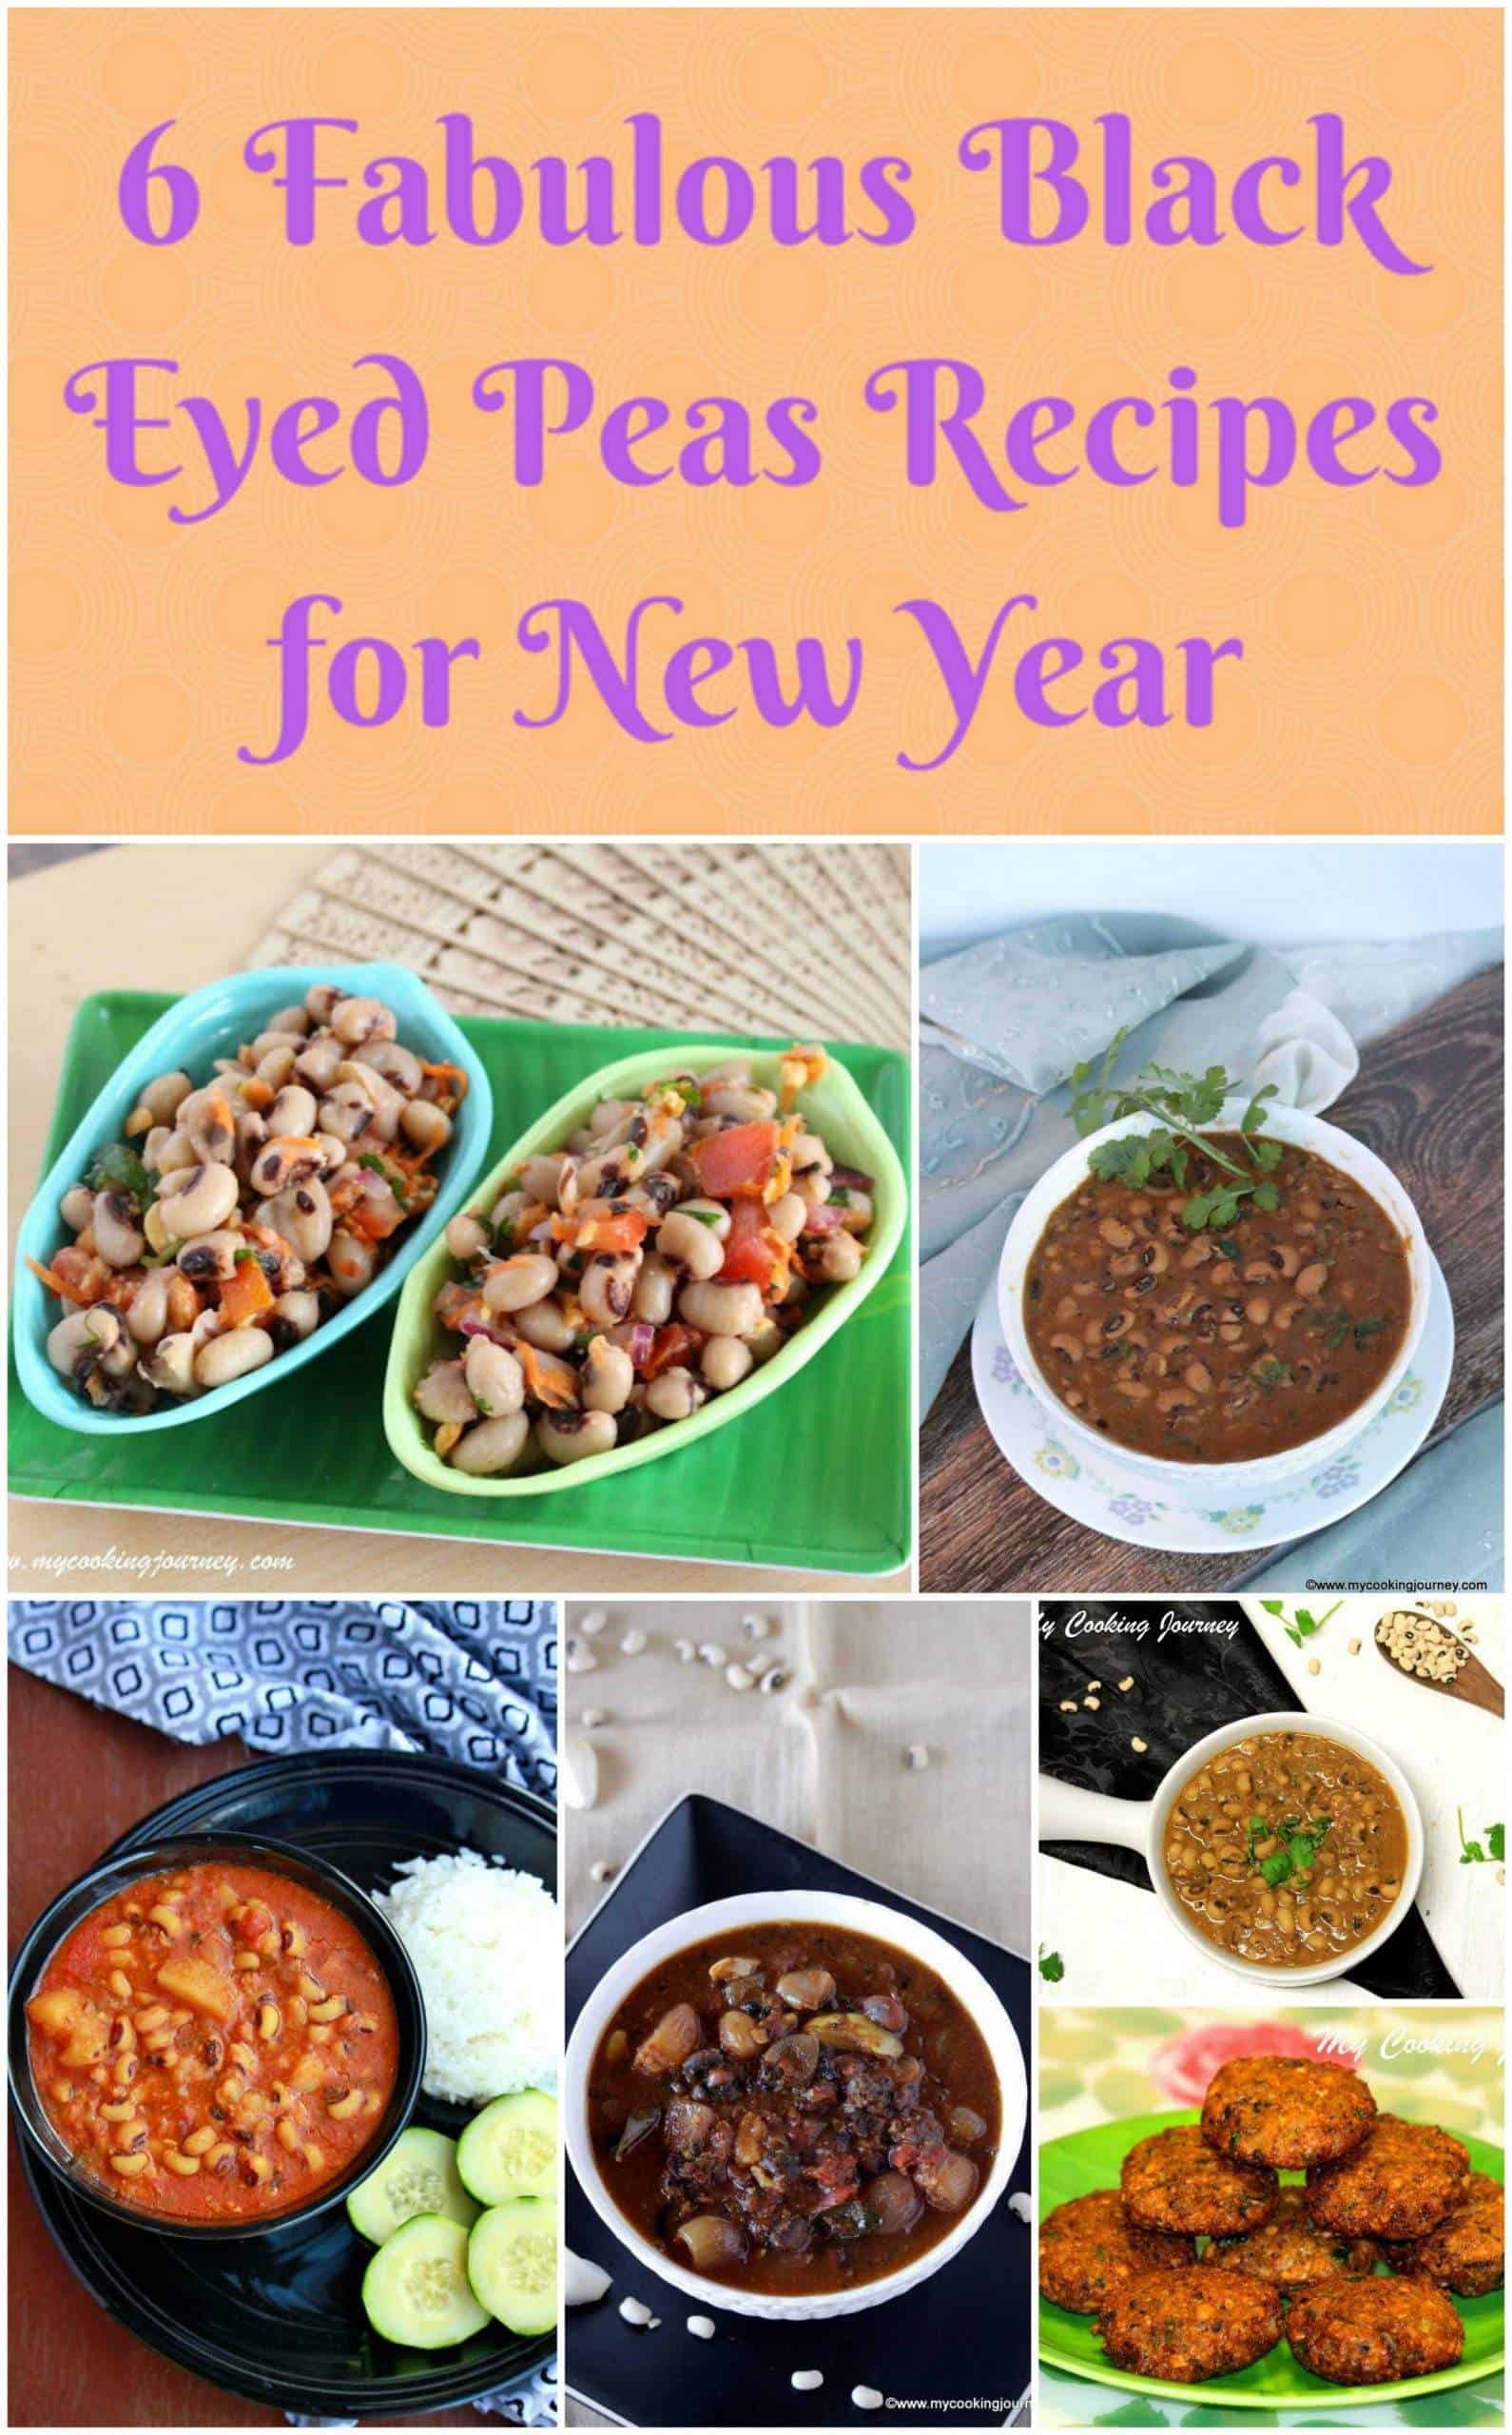 6 Fabulous Black Eyed Peas Recipes for New Year